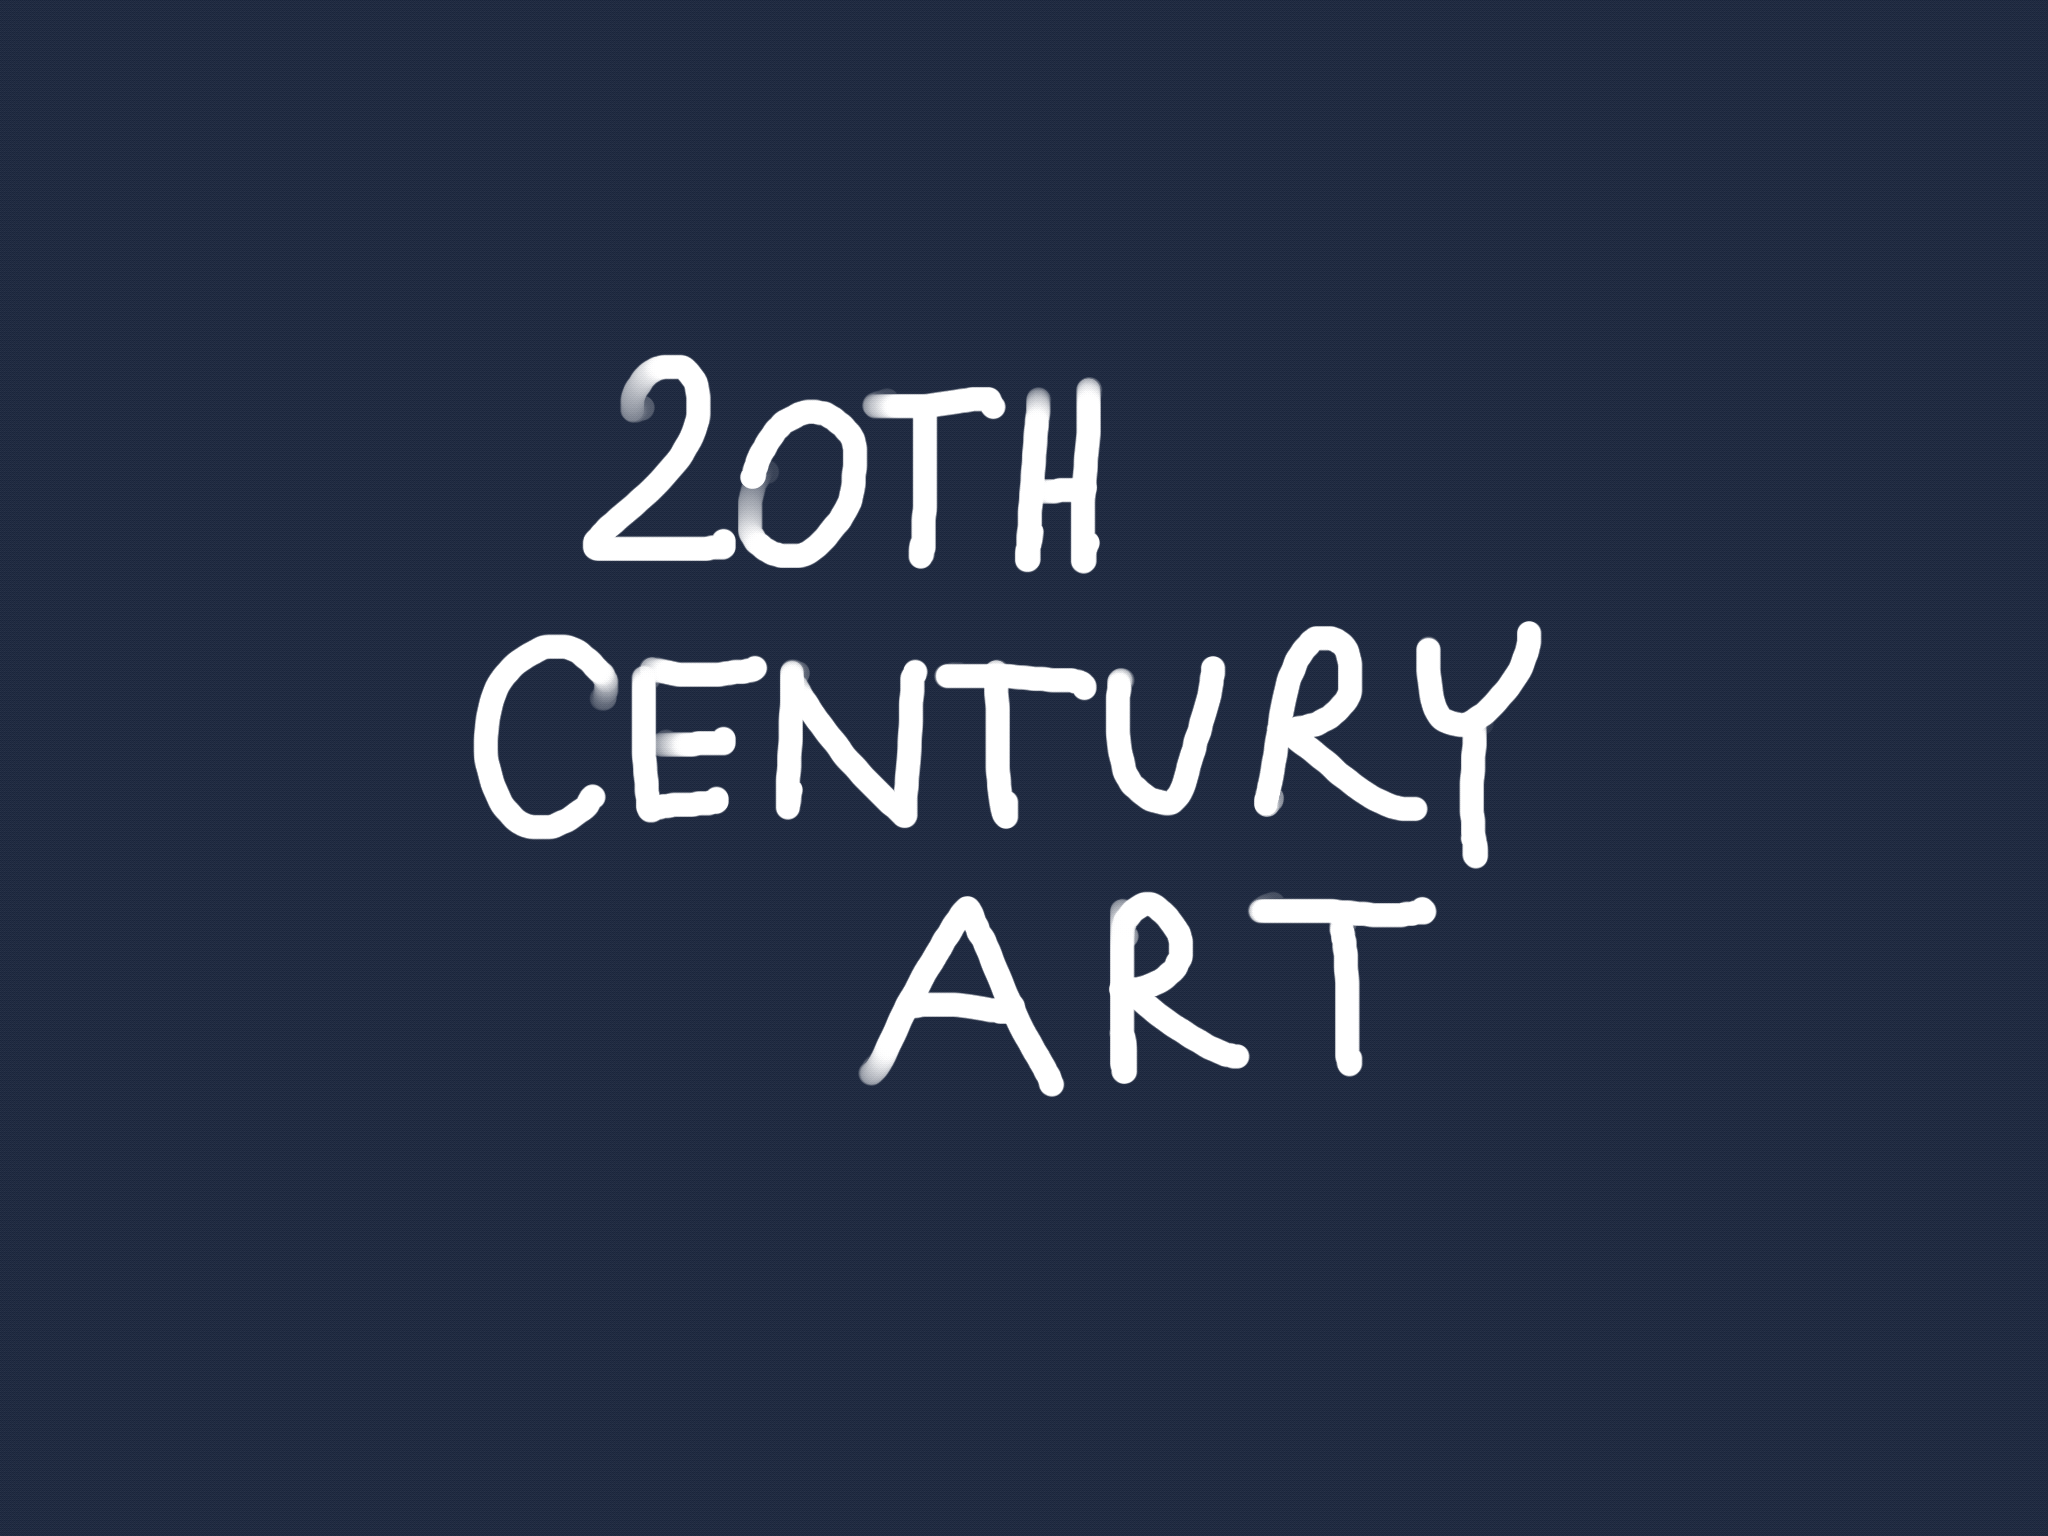 An animated title card that says "20th Century Art" which cycles through various font styles.